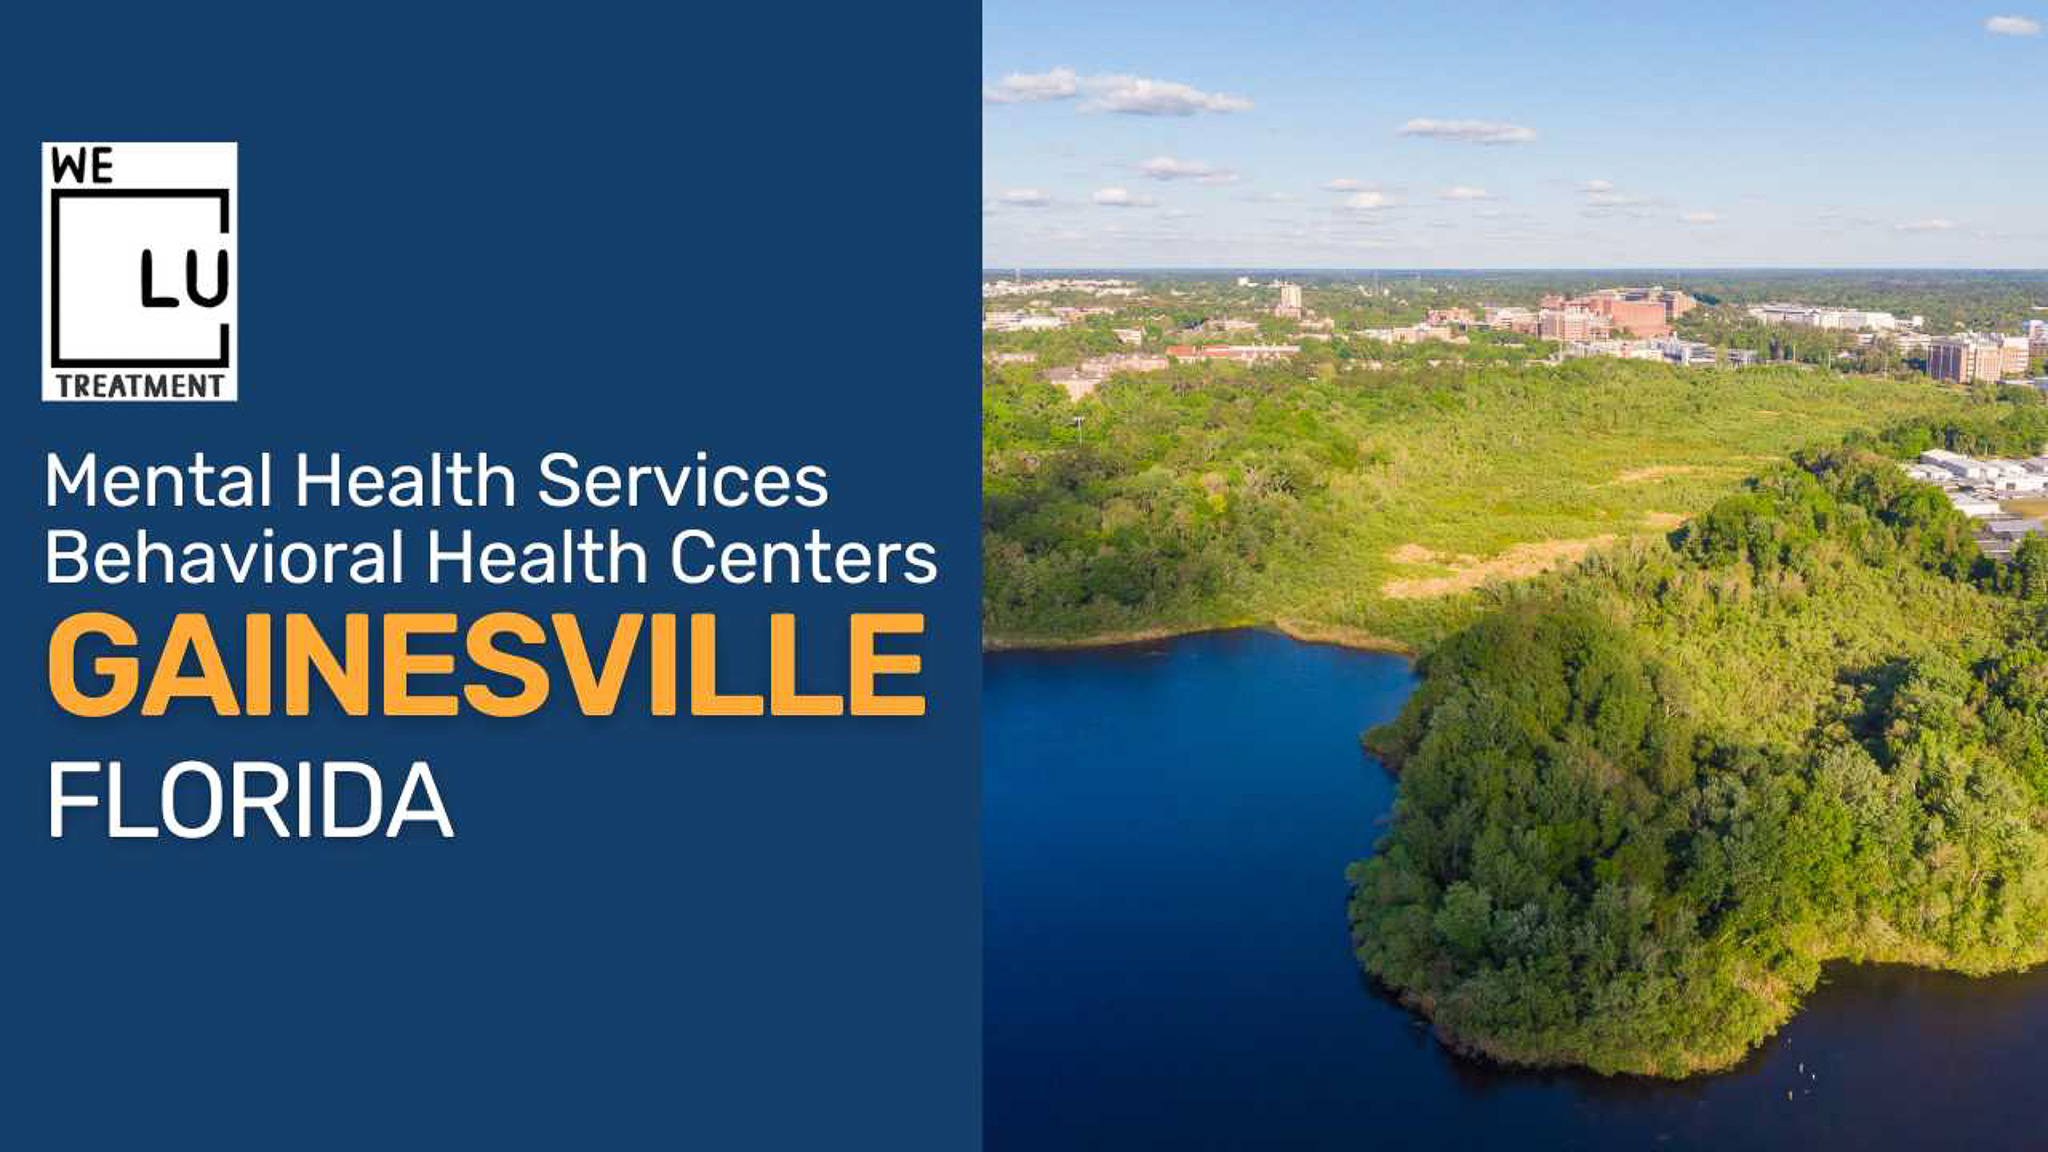 Gainesville FL (MH) We Level Up treatment center for drug and alcohol rehab detox and mental health services - Image 1